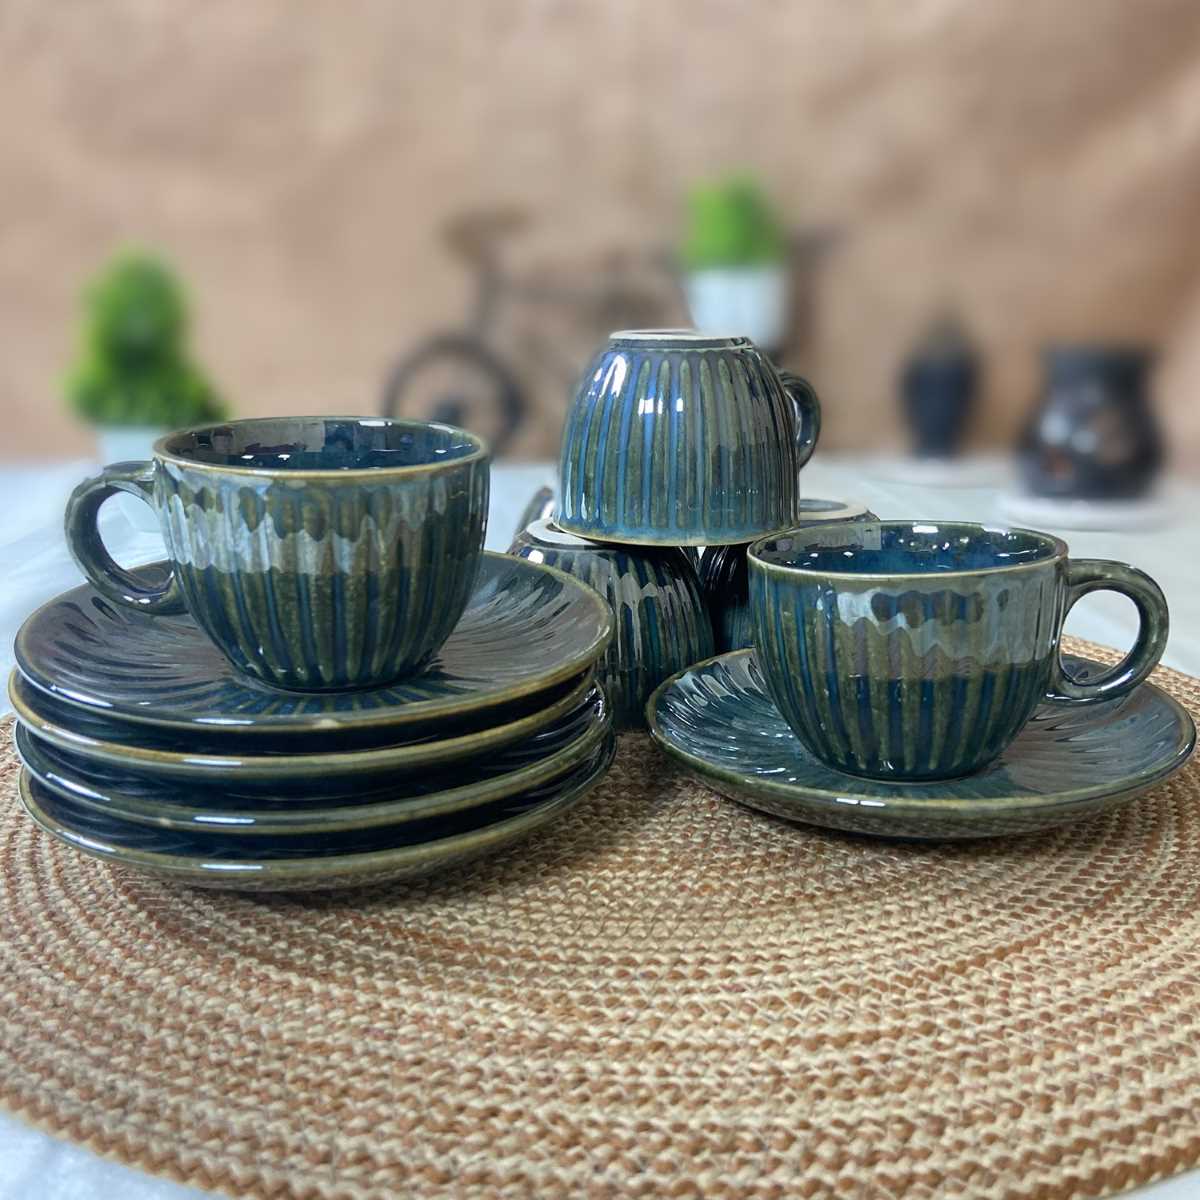 Chic Emerald Green Tea Cups with Saucers (Set of 6)